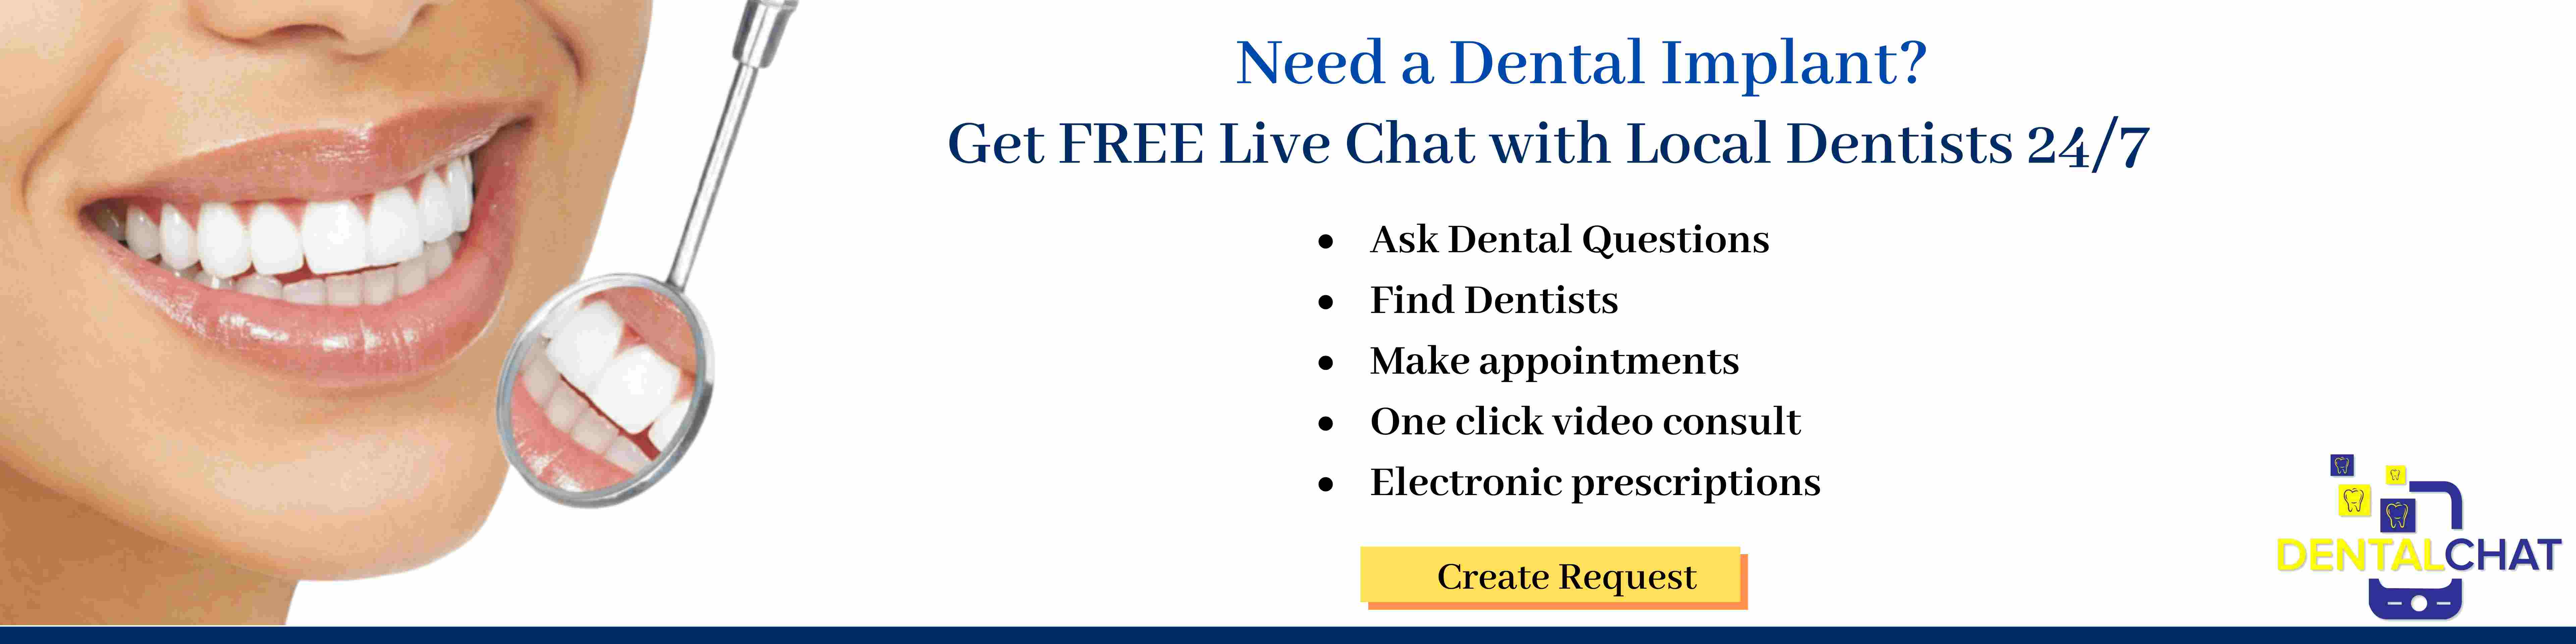 Full denture question about dental implants, local partial denture questions chat